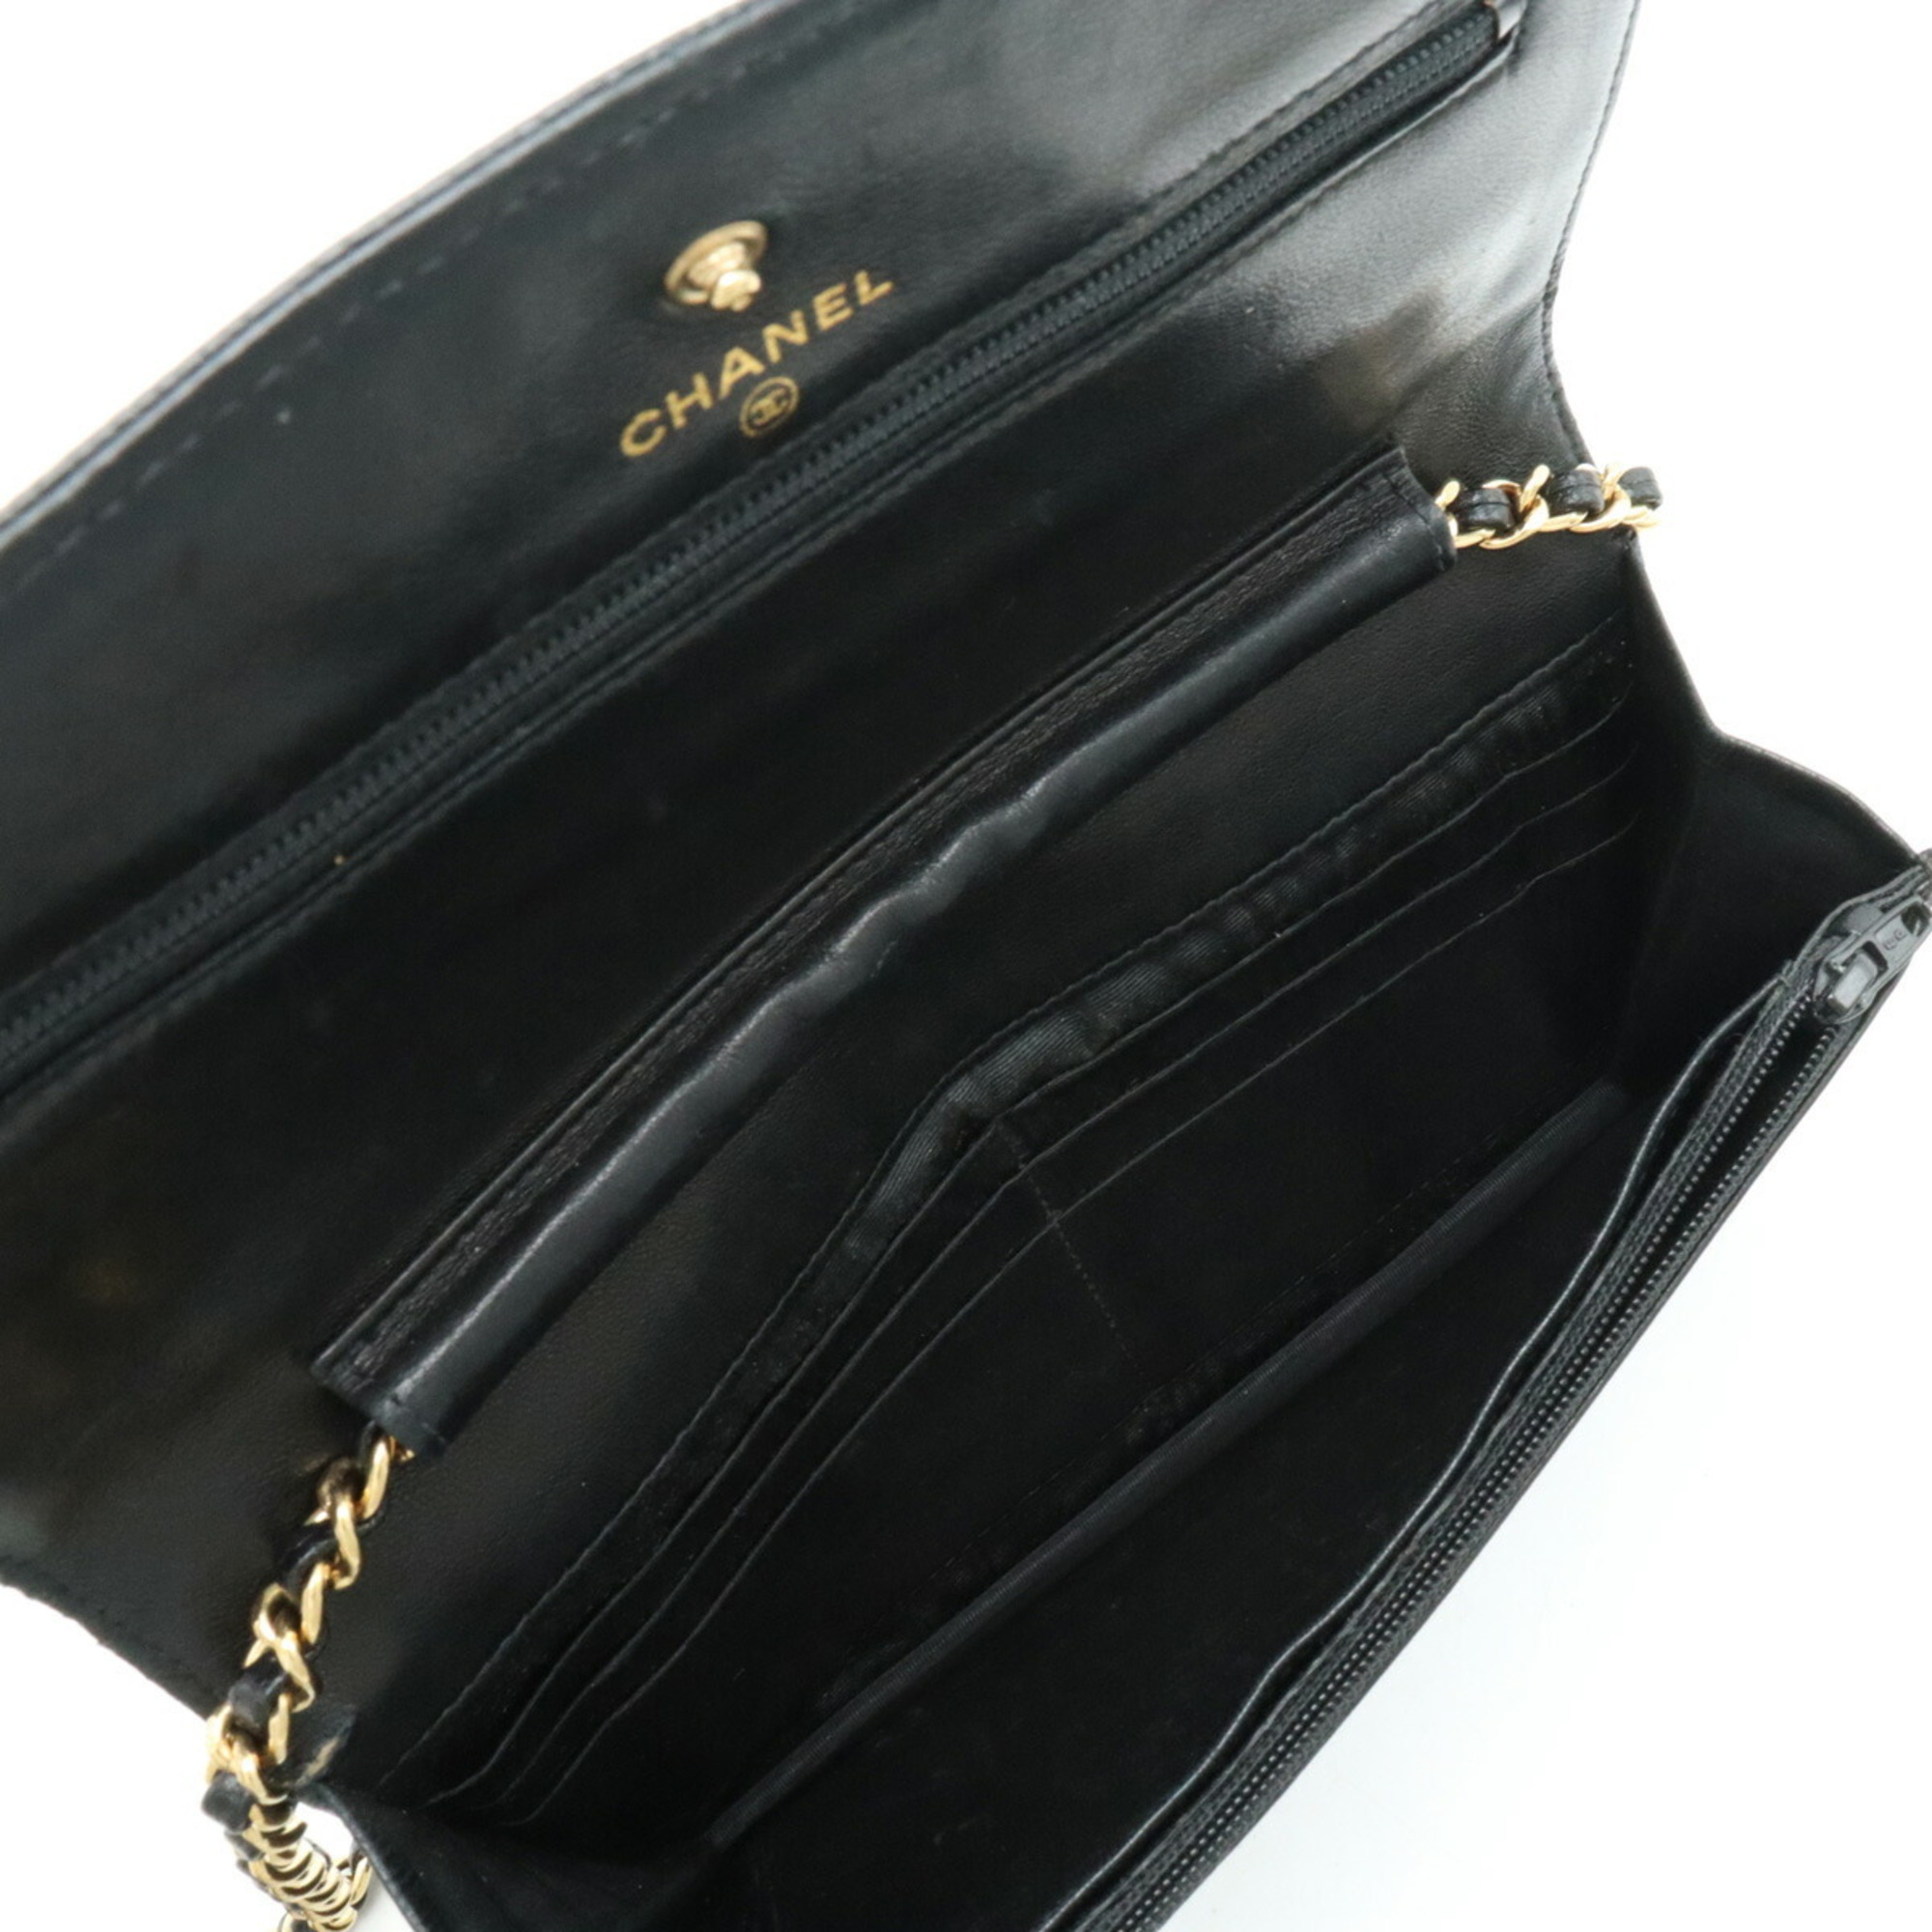 CHANEL Caviar Skin Coco Mark Chain Wallet Shoulder Bag Leather Black A13509